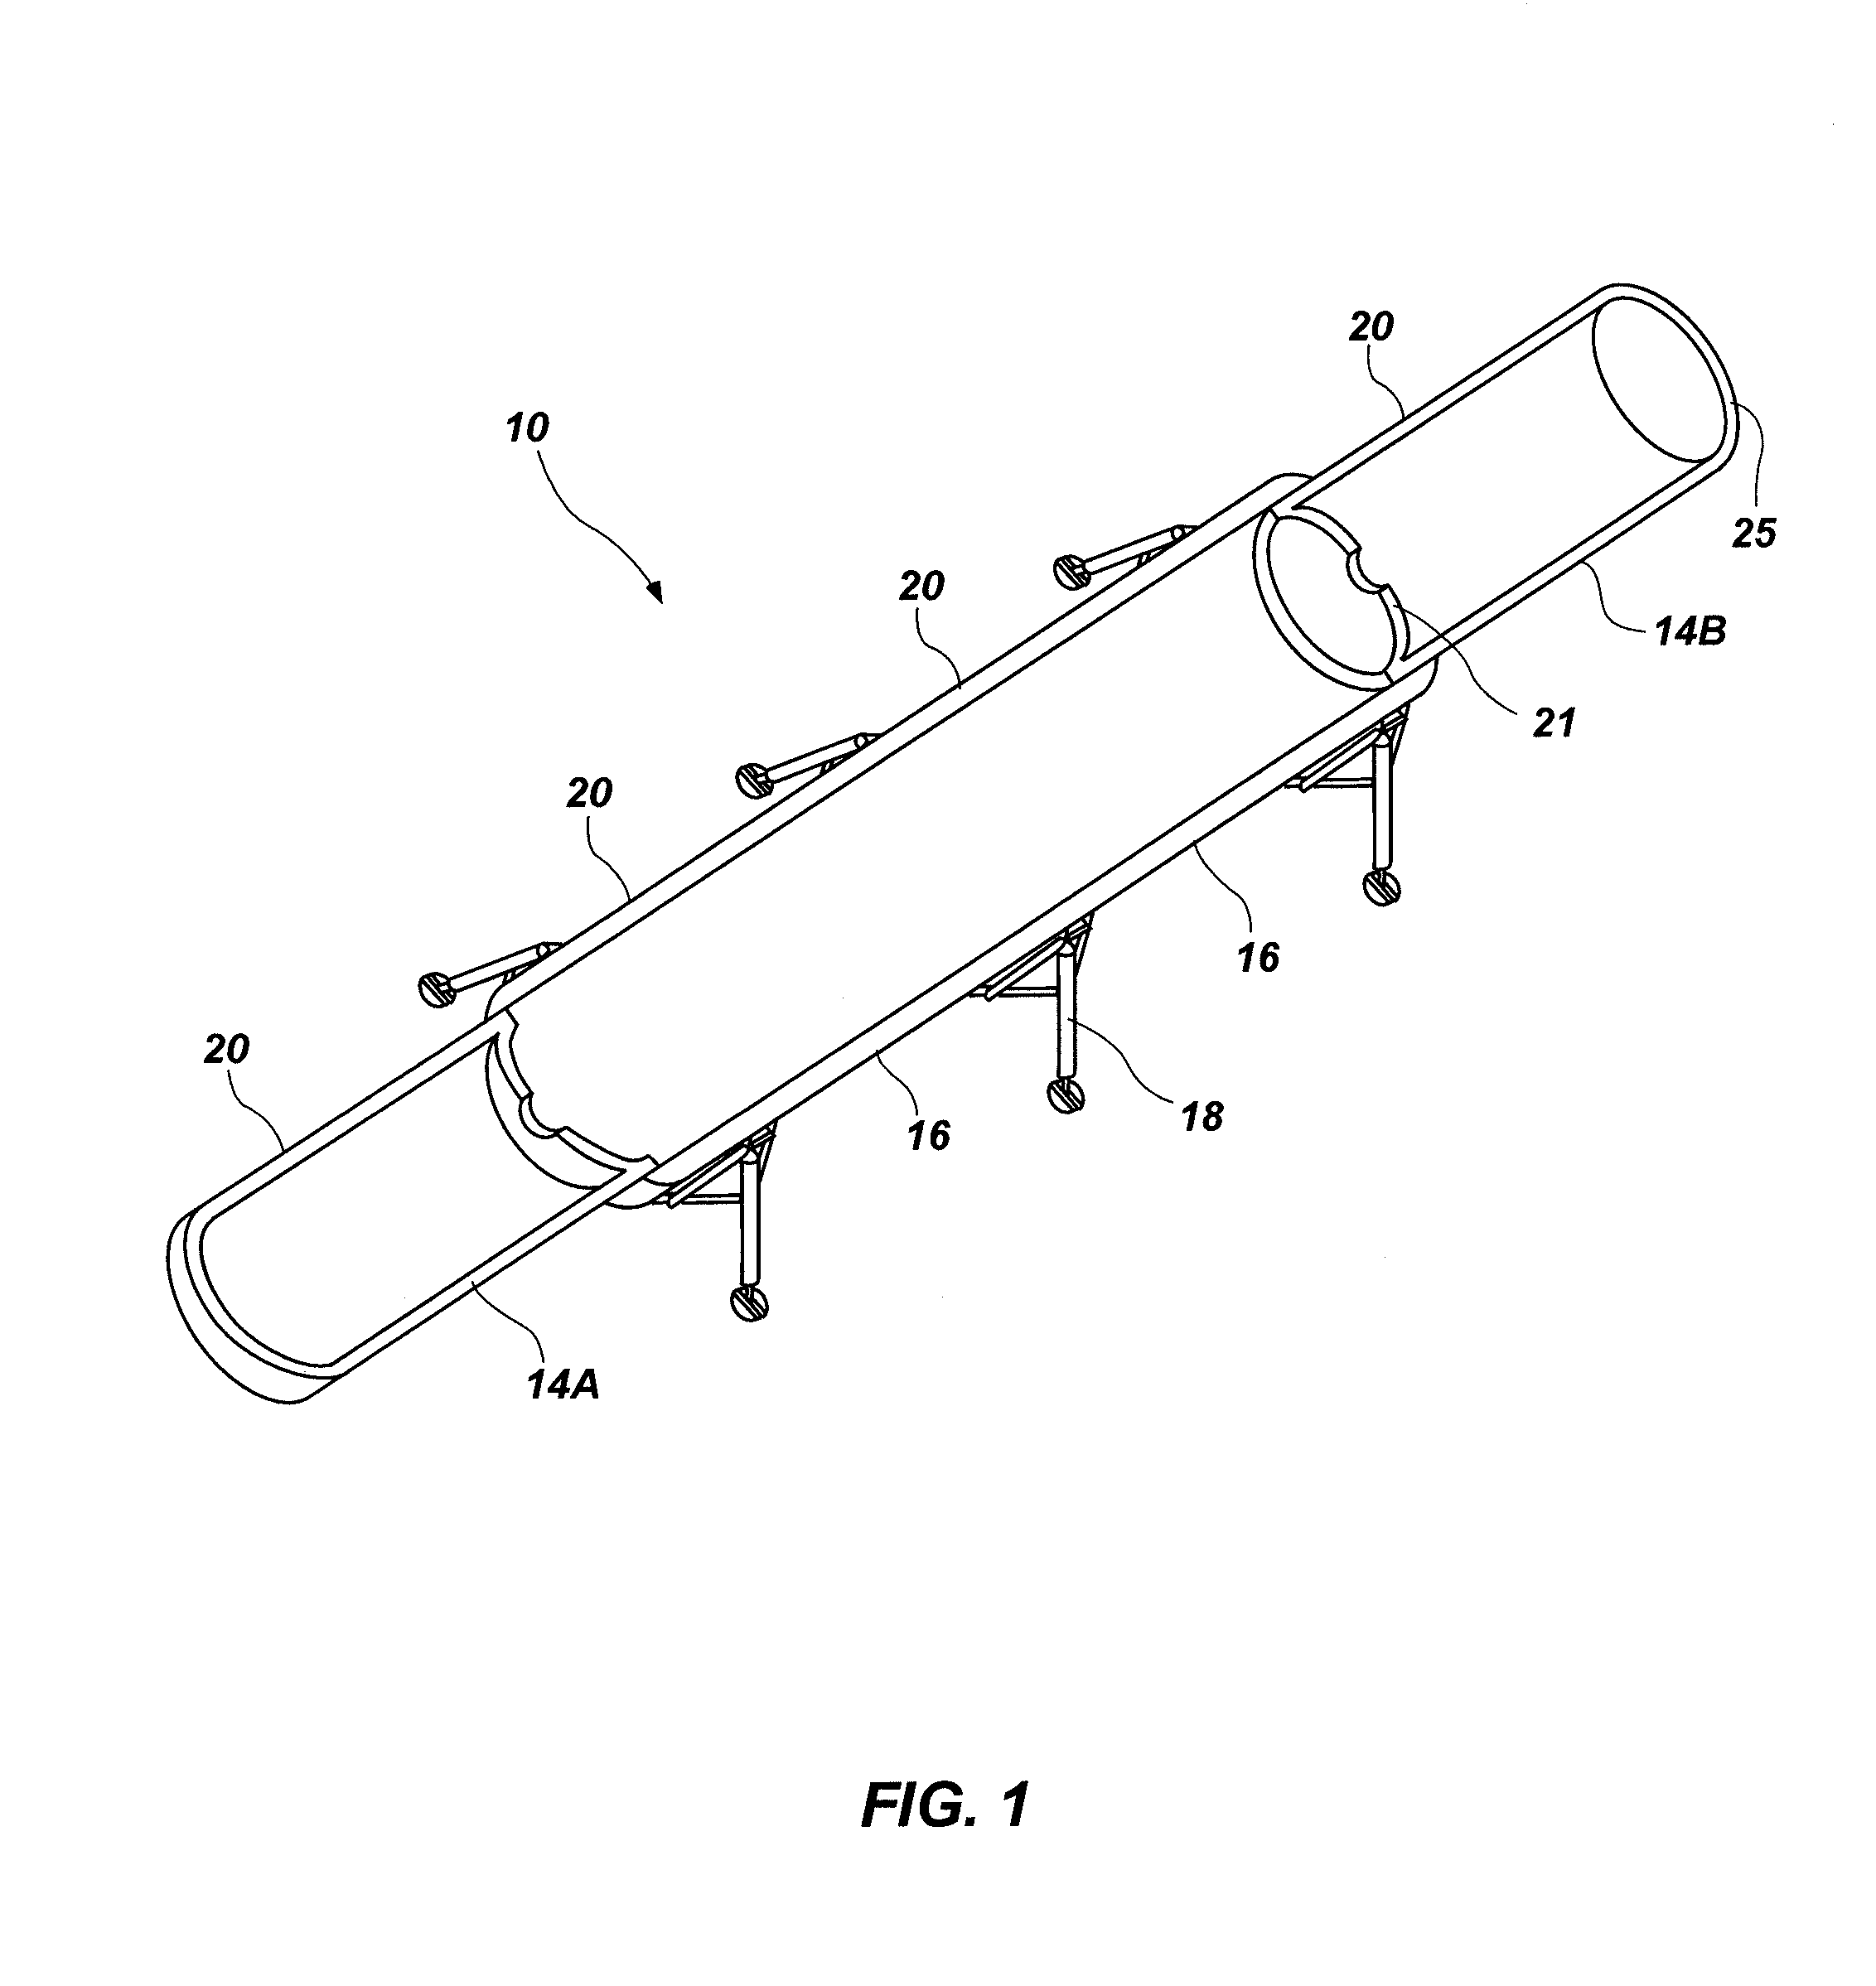 Multifunctional chambered radiation shields and systems and related methods